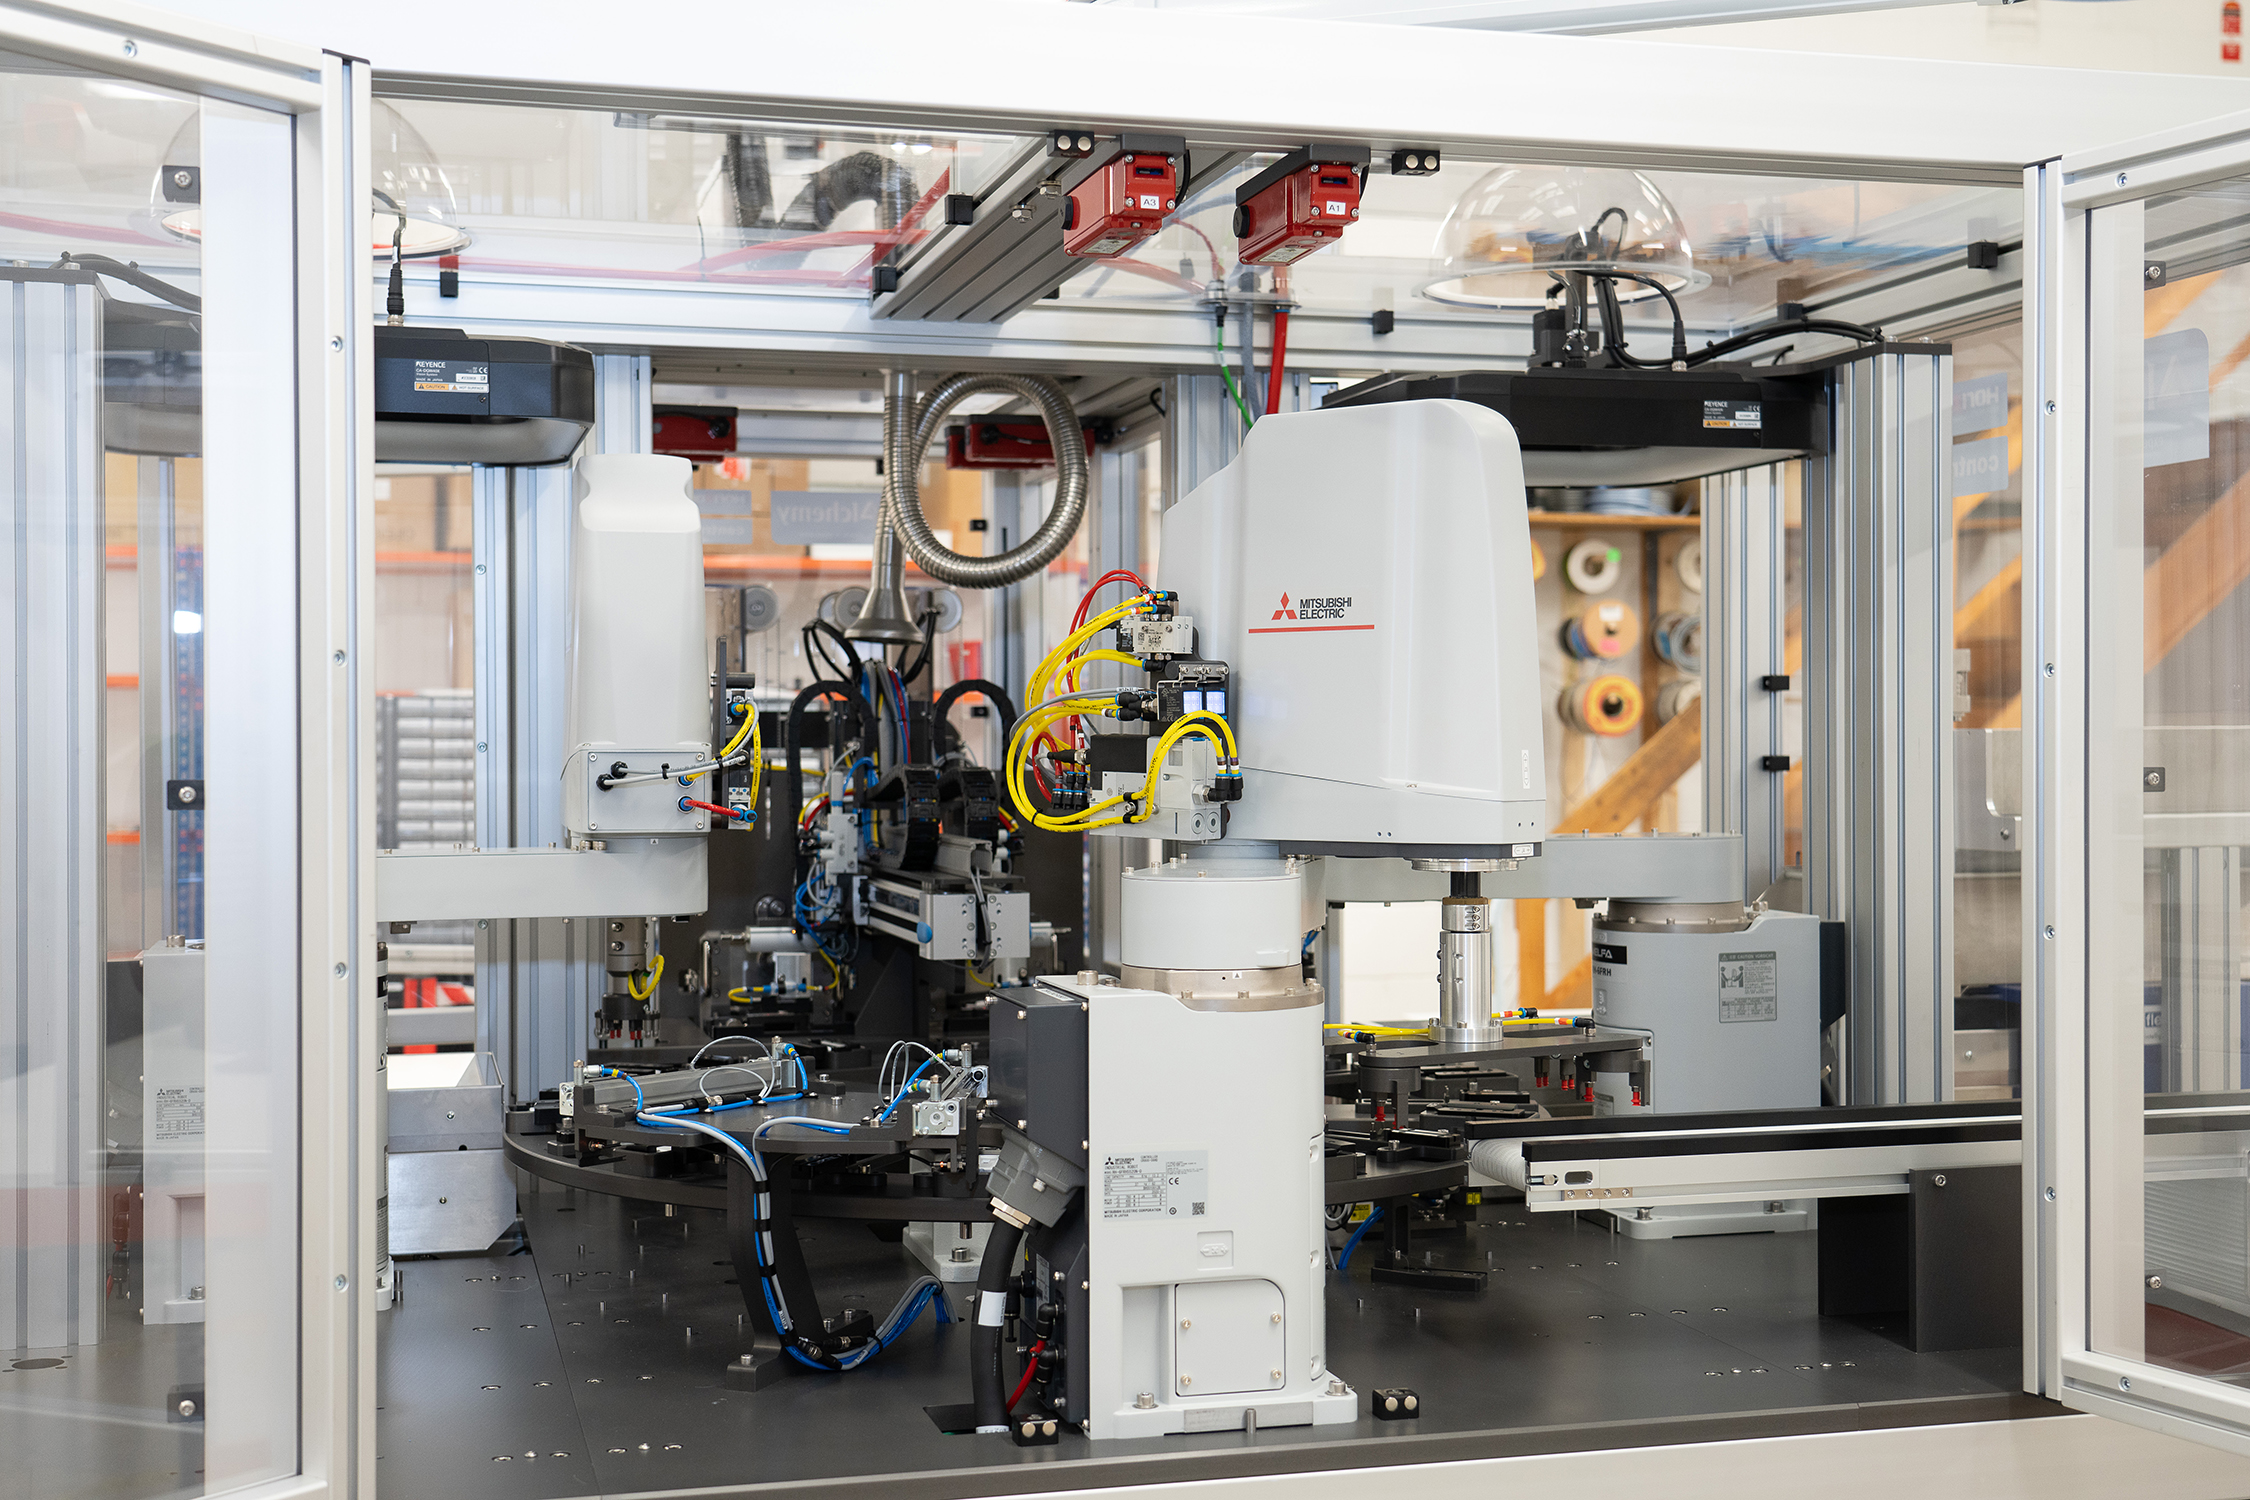 Cooperative systems like horizontal SCARA robots, can address the needs of medical device manufacturers with limited room available. [Source: Horizon Instruments]